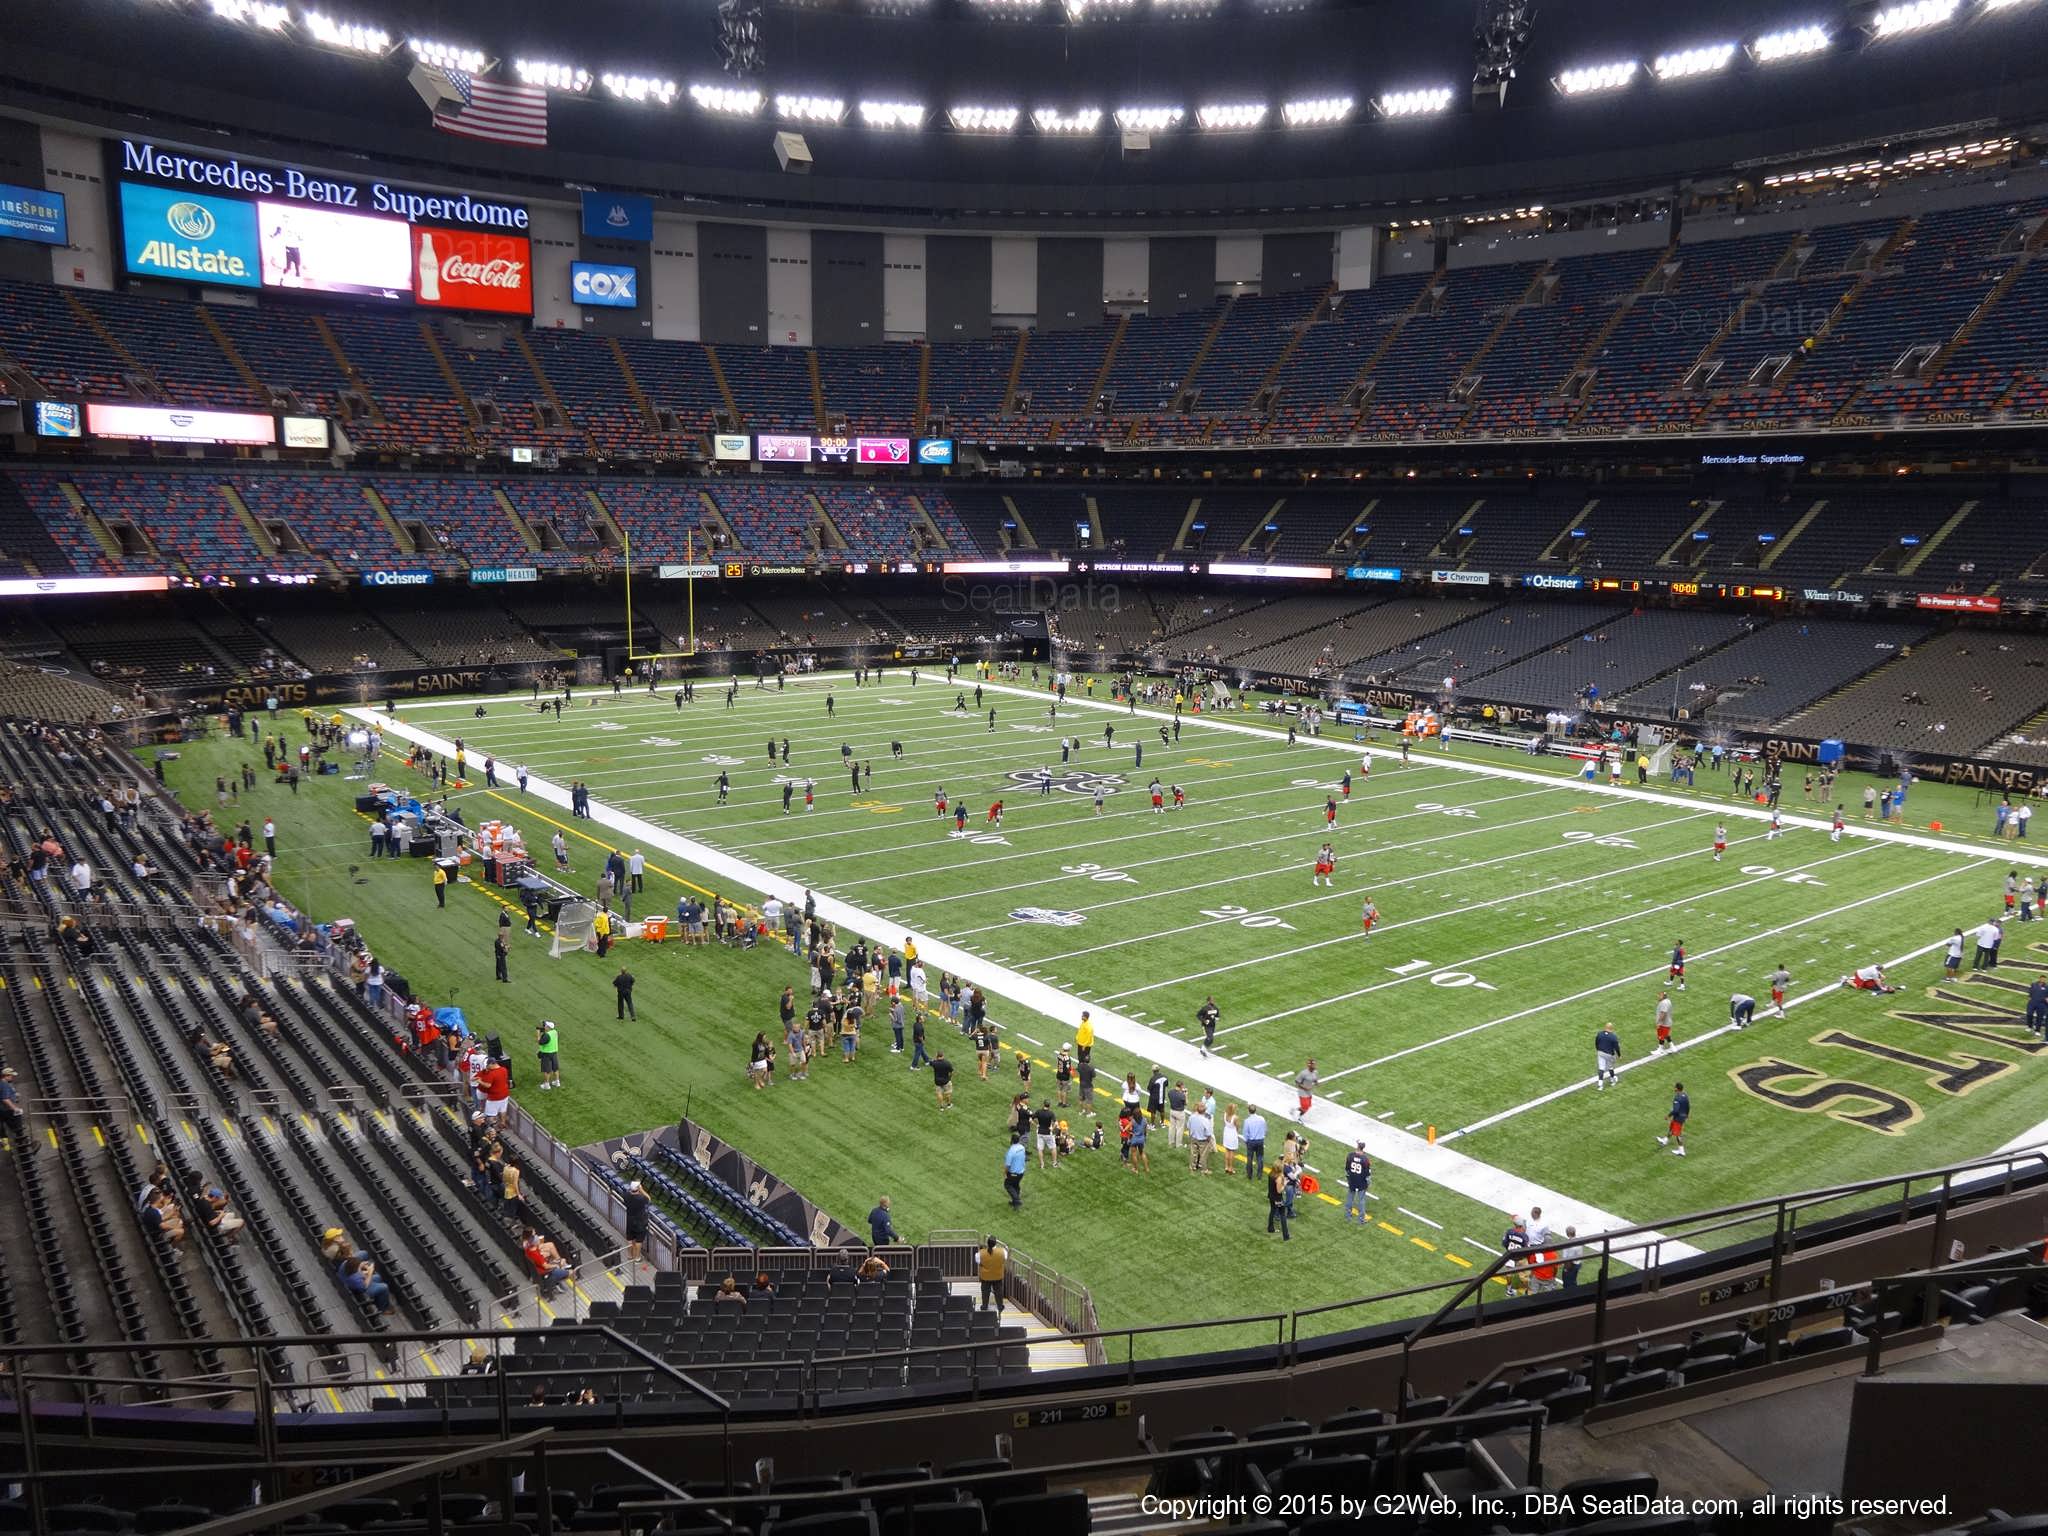 Seat view from section 305 at the Mercedes-Benz Superdome, home of the New Orleans Saints